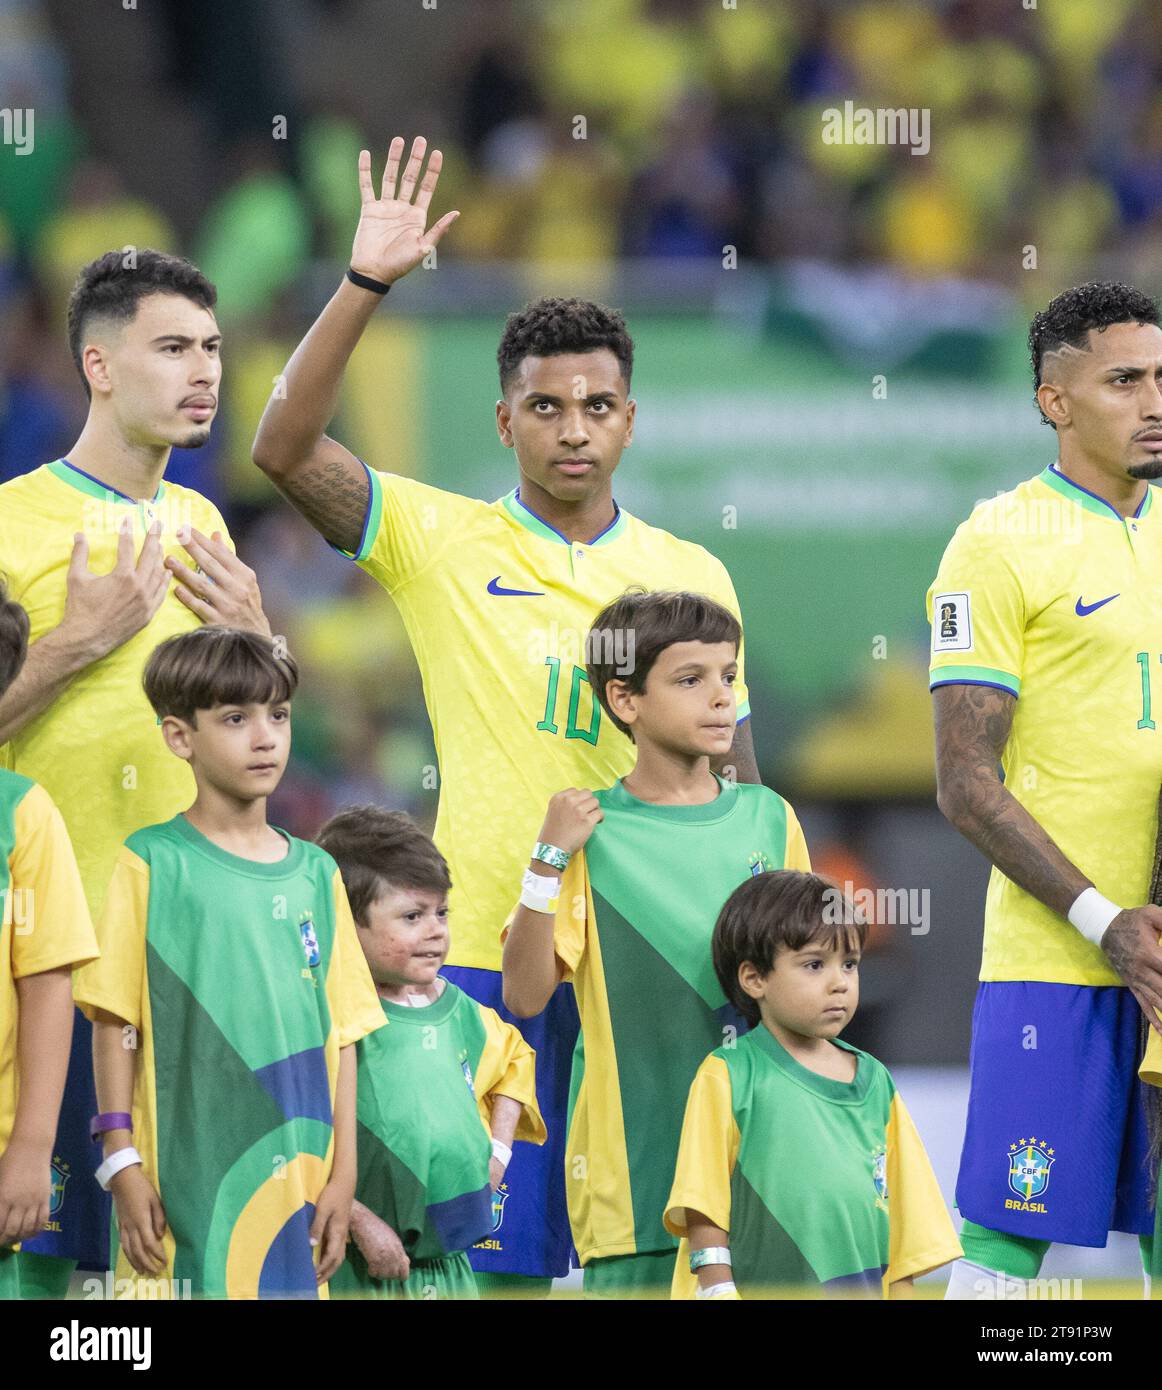 Rio De Janeiro, Brazil. 21st Nov, 2023. RIO DE JANEIRO, BRAZIL - NOVEMBER 21: Rodrygo of Brazil waves before a match between Brazil and Argentina as part of 2026 FIFA World Cup South American Qualification at Maracana Stadium on November 21, 2023 in Rio de Janeiro, Brazil. (Photo by Wanderson Oliveira/PxImages/Sipa USA) Credit: Sipa USA/Alamy Live News Stock Photo